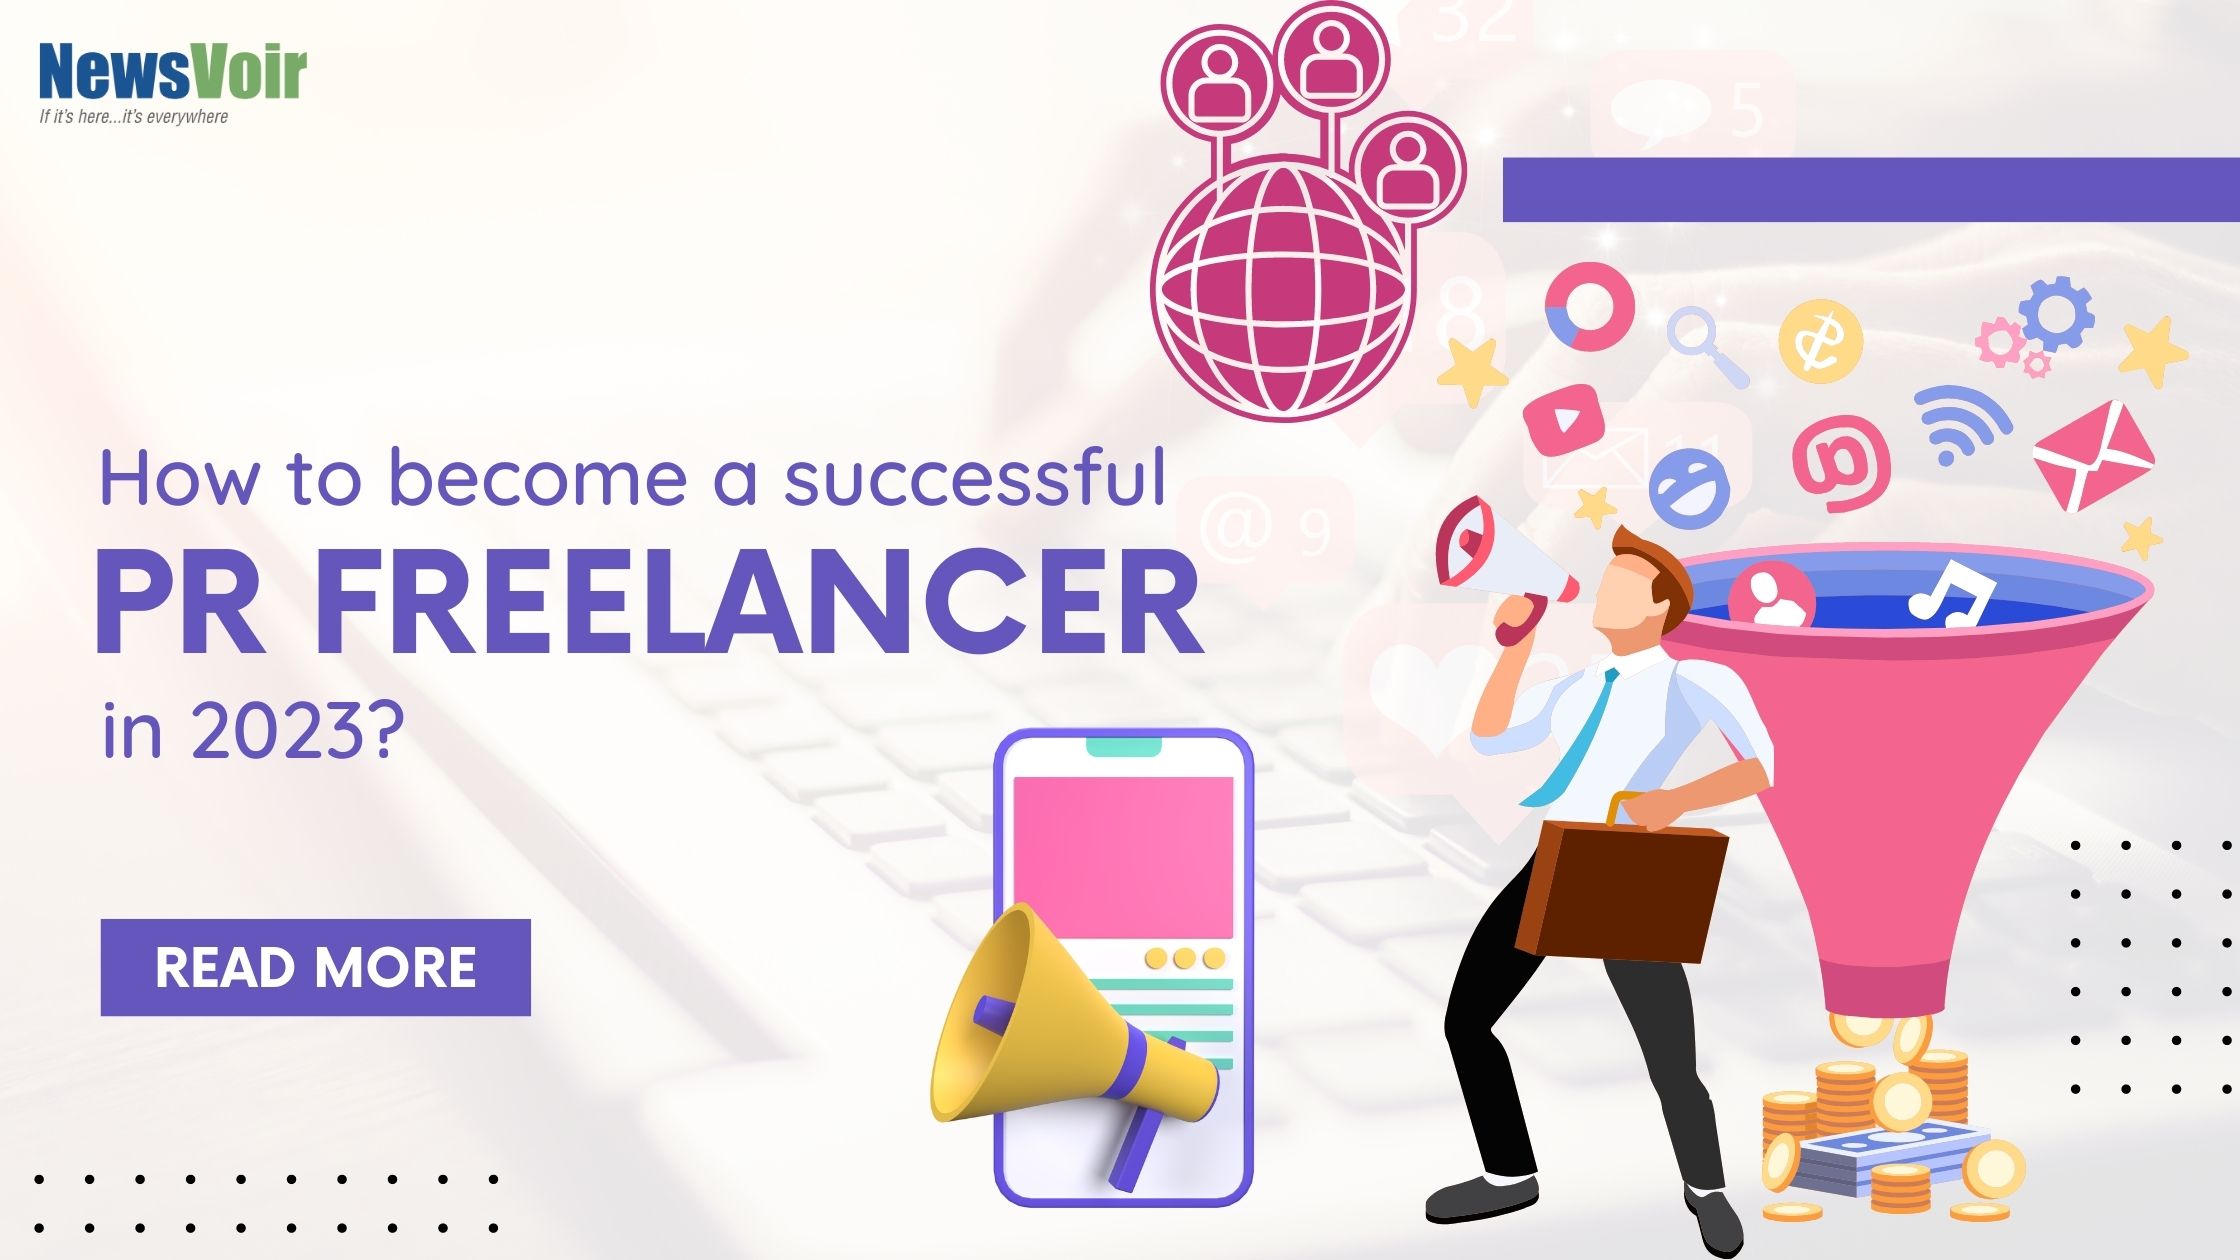 How to become a successful PR freelancer in 2023